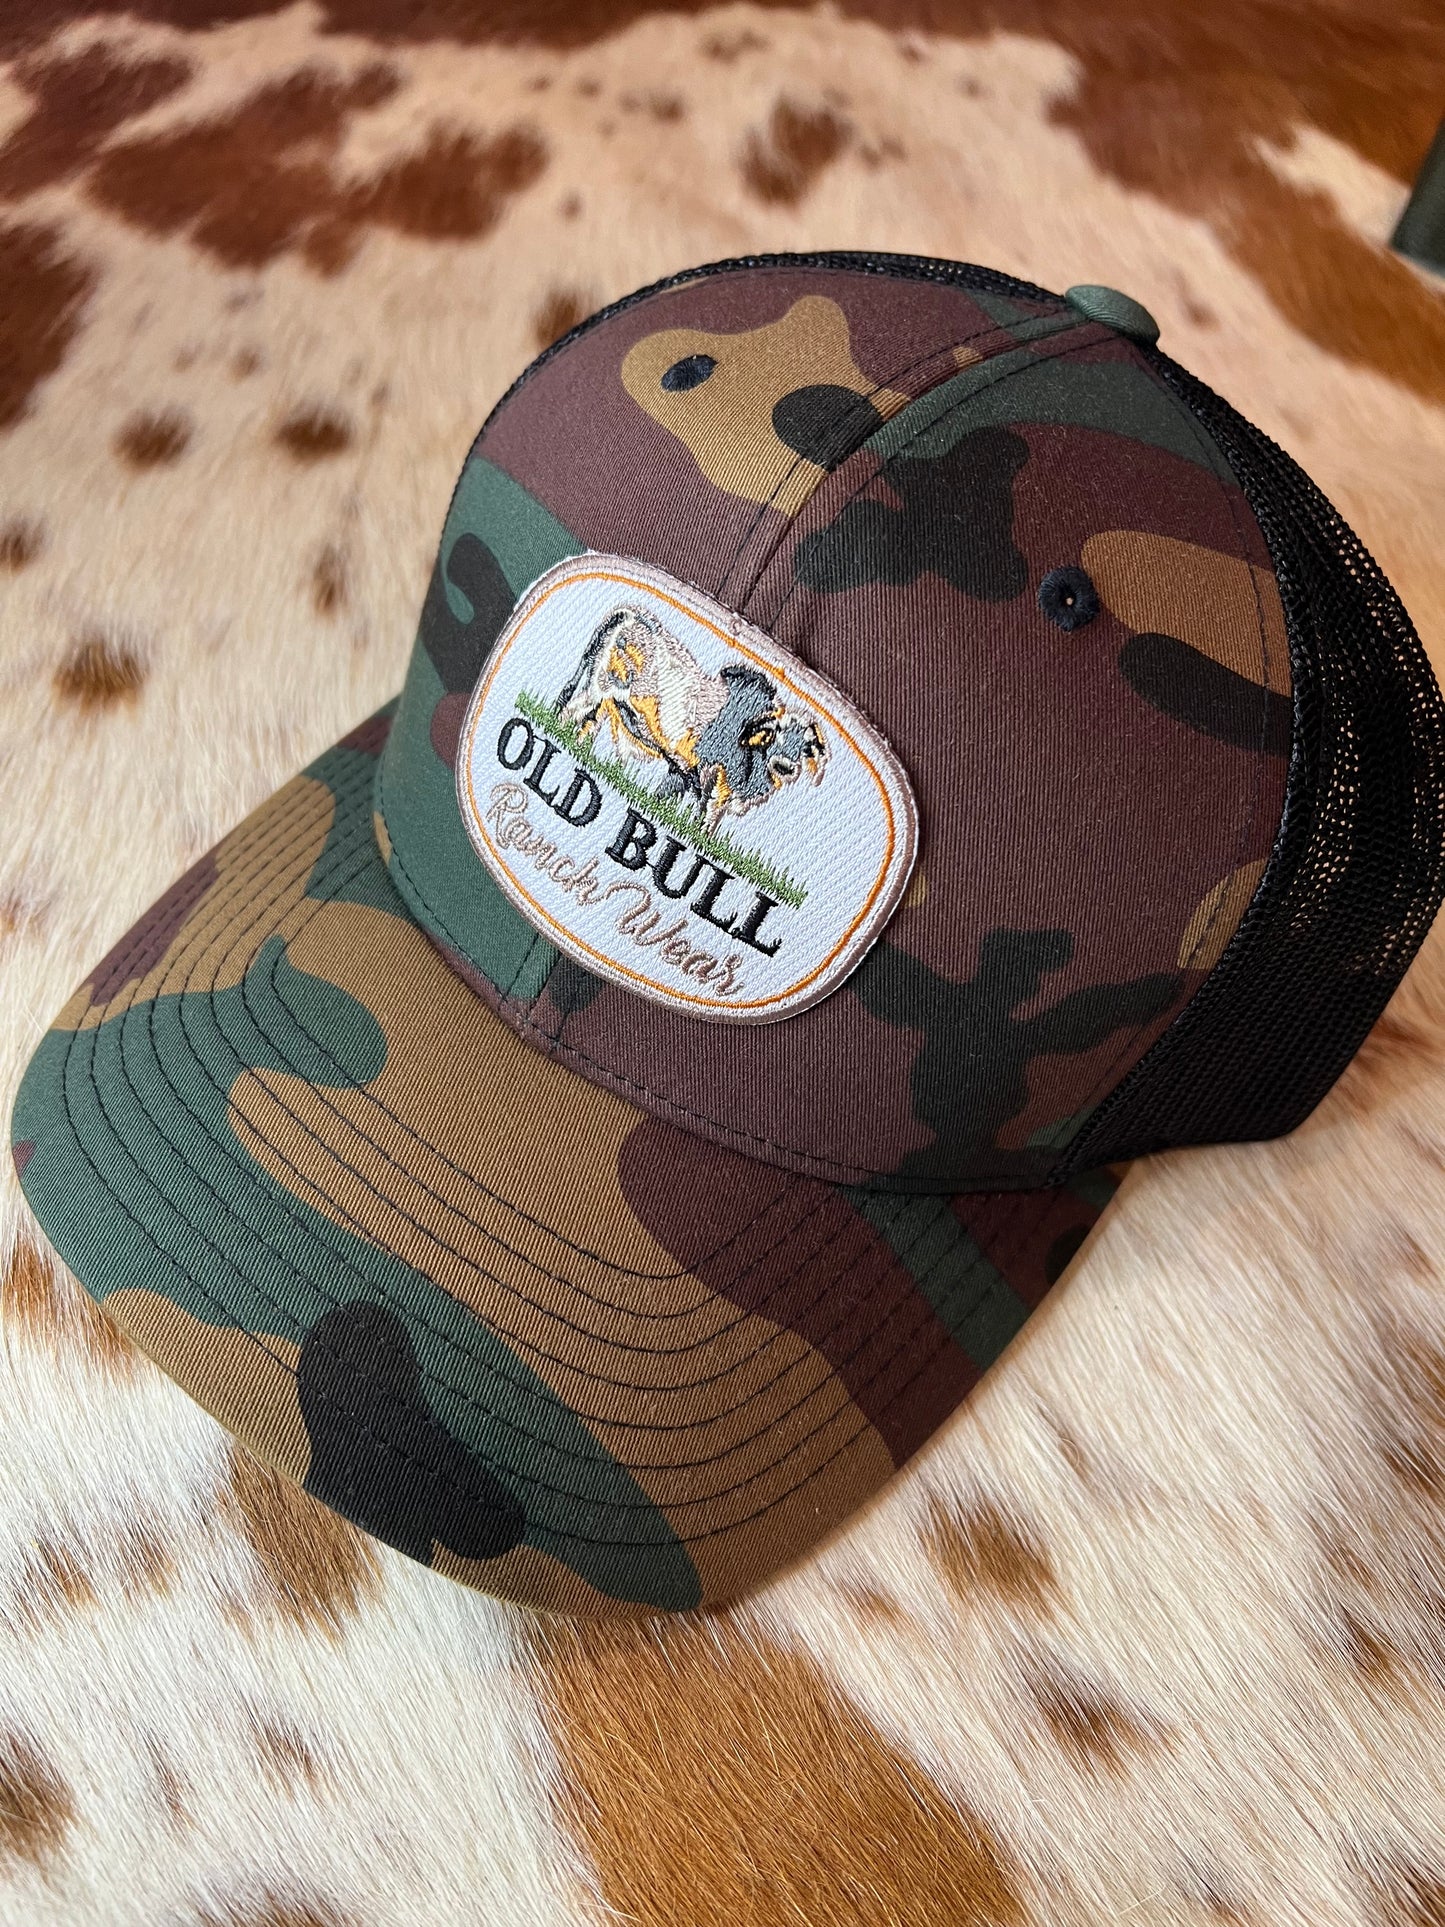 Hats with Old Bull Patch